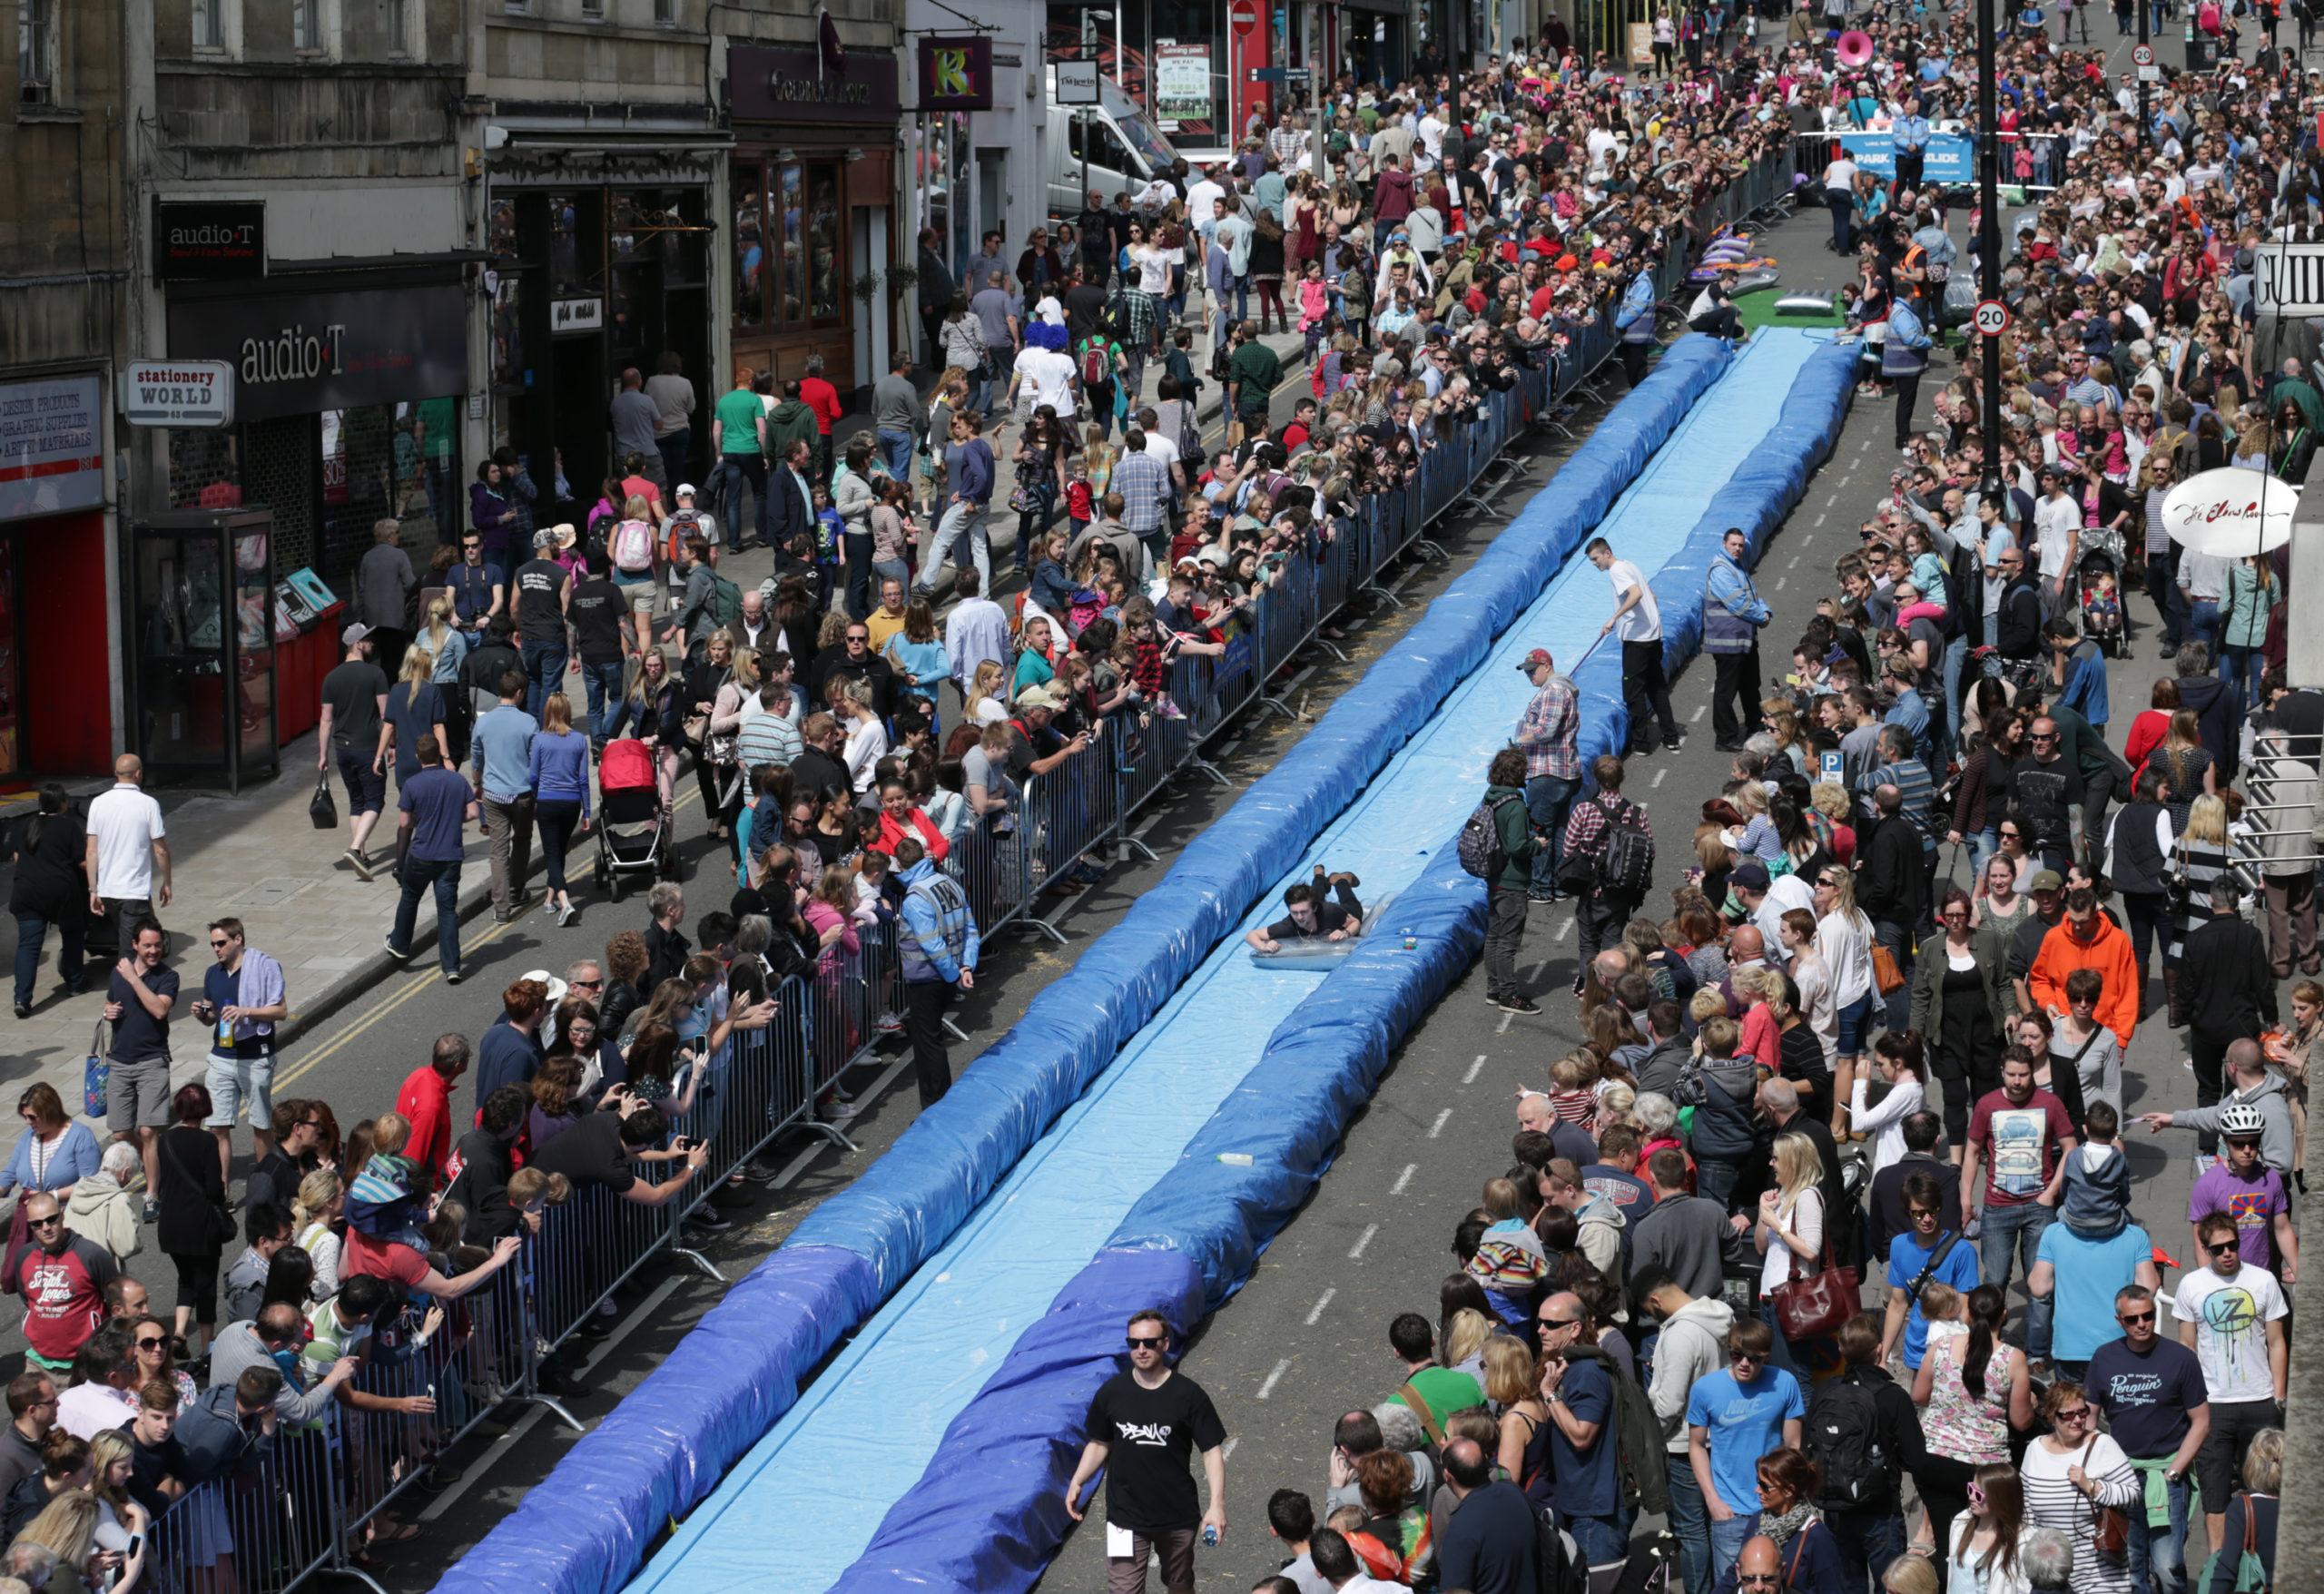 This Is What Happens When You Turn A Street Into A Slip ‘n Slide